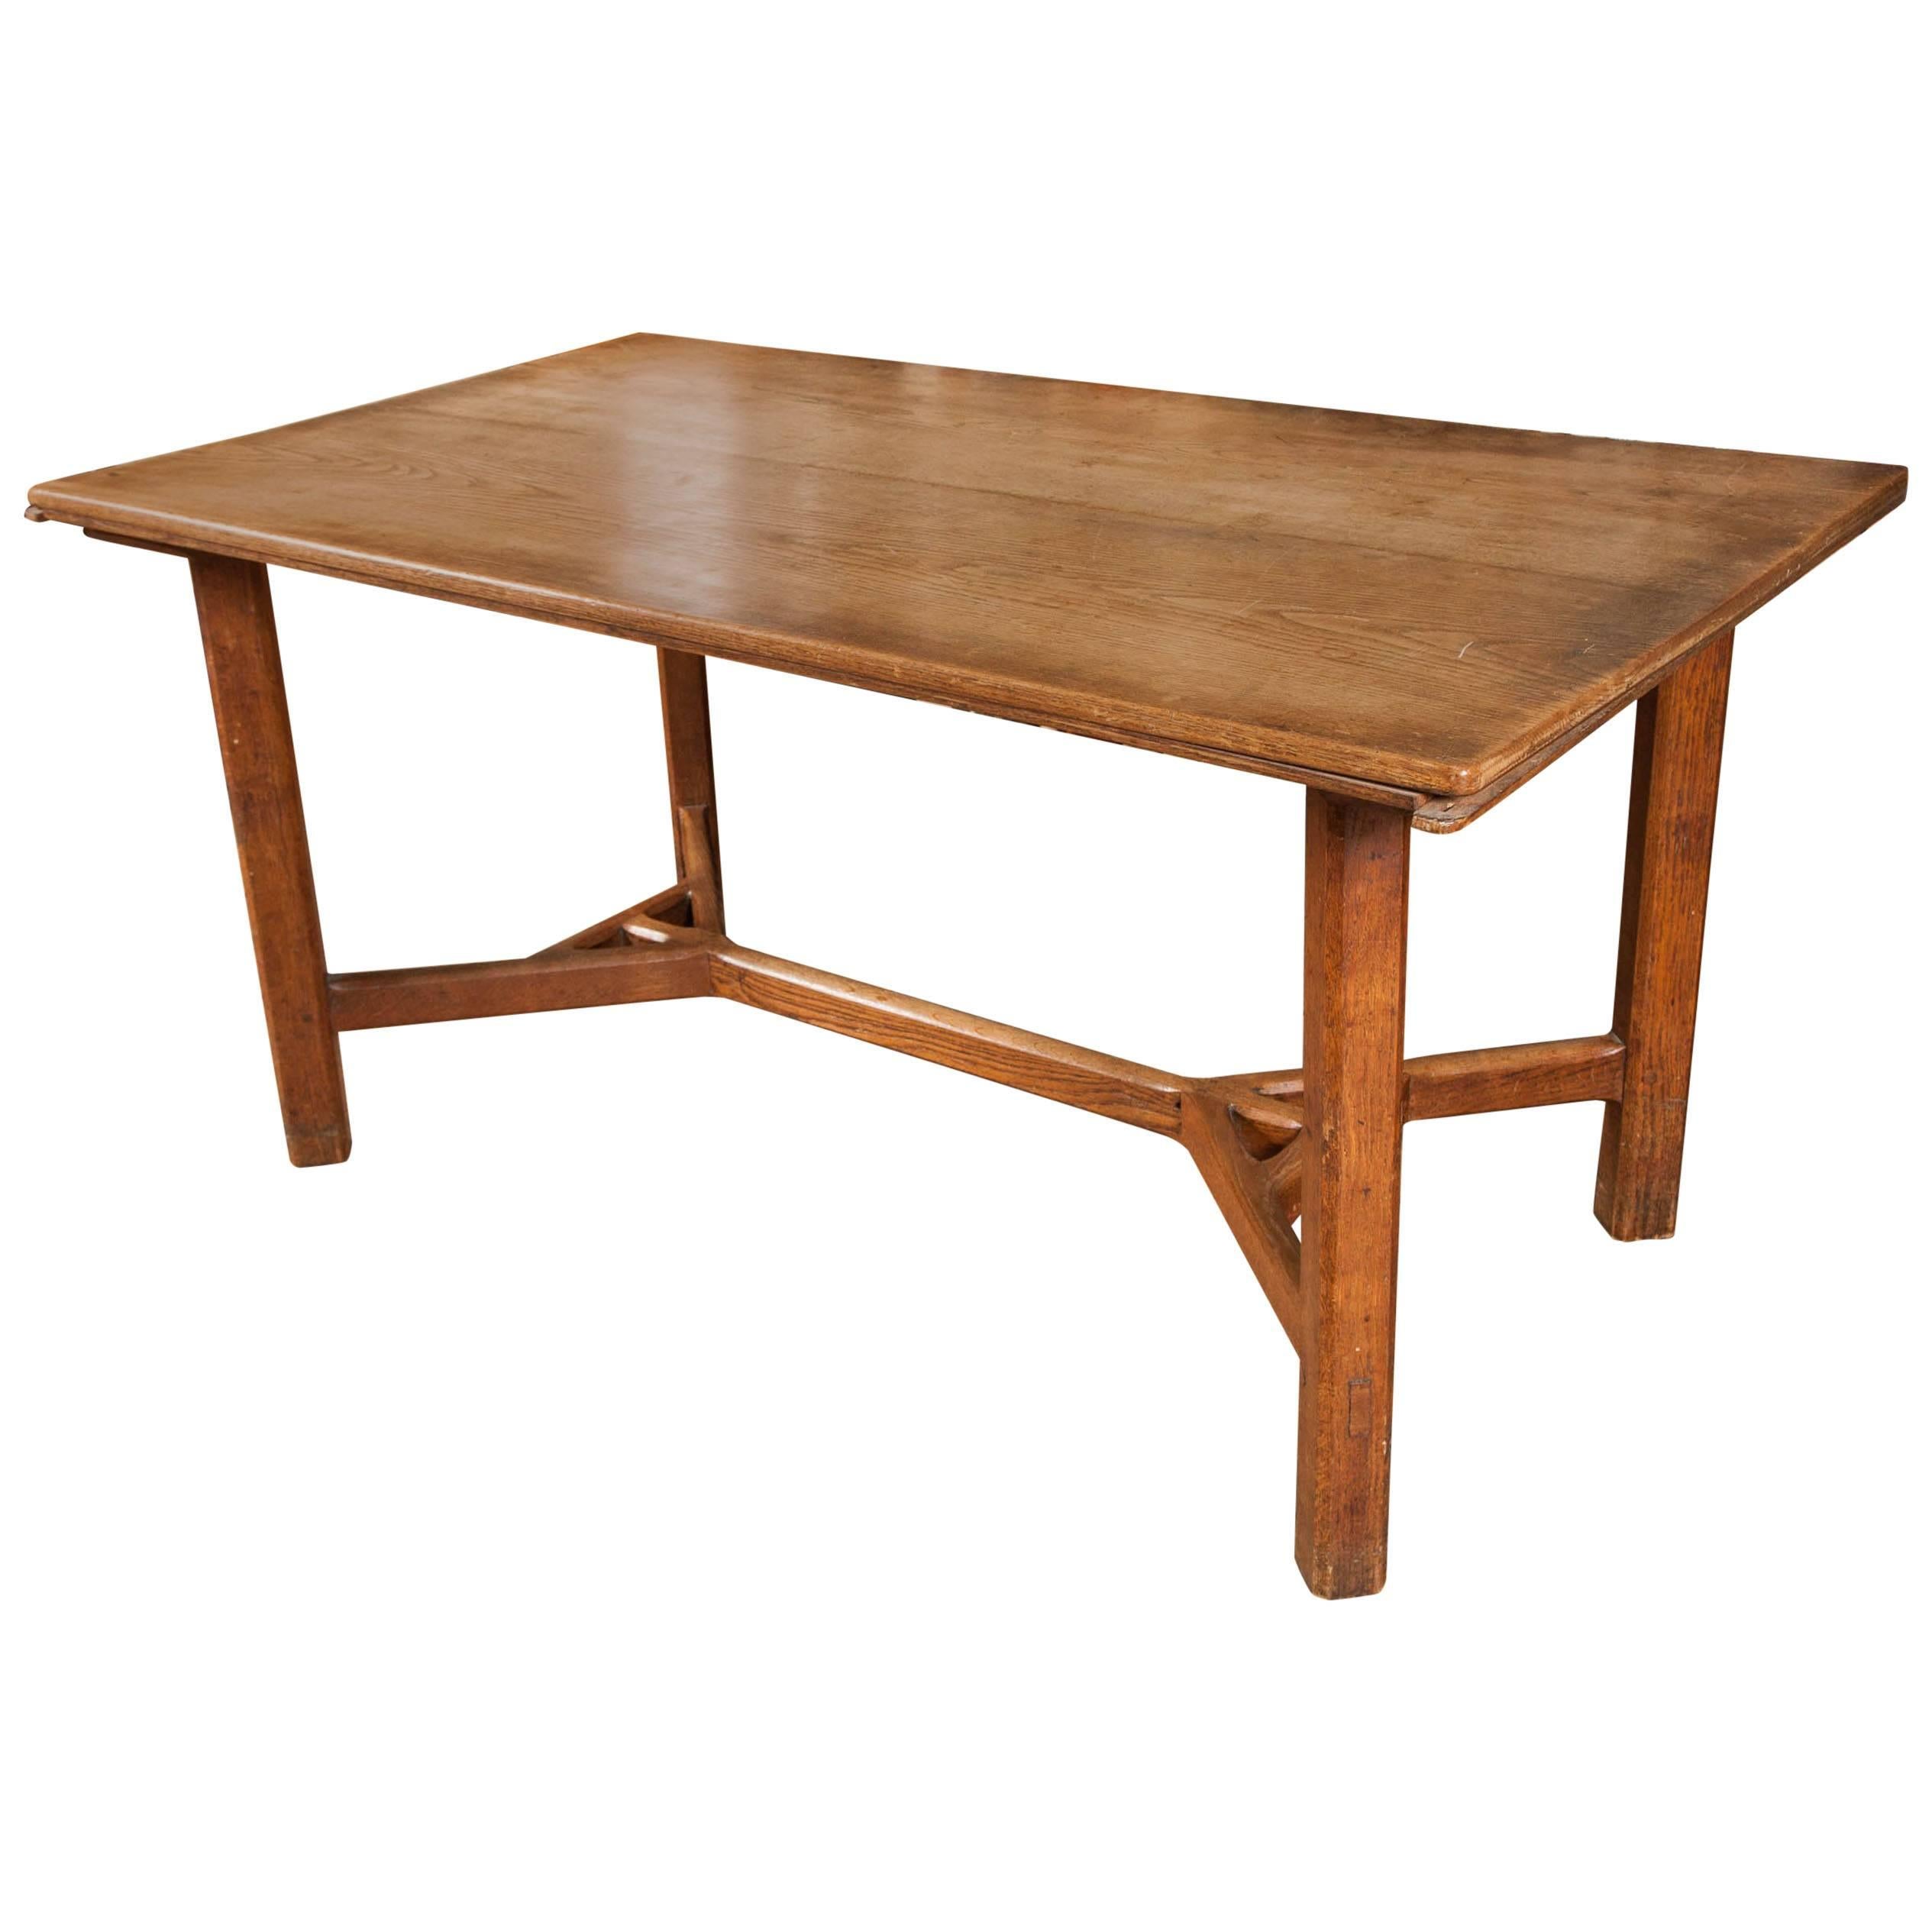 Cotswold School Arts and Crafts Oak Table